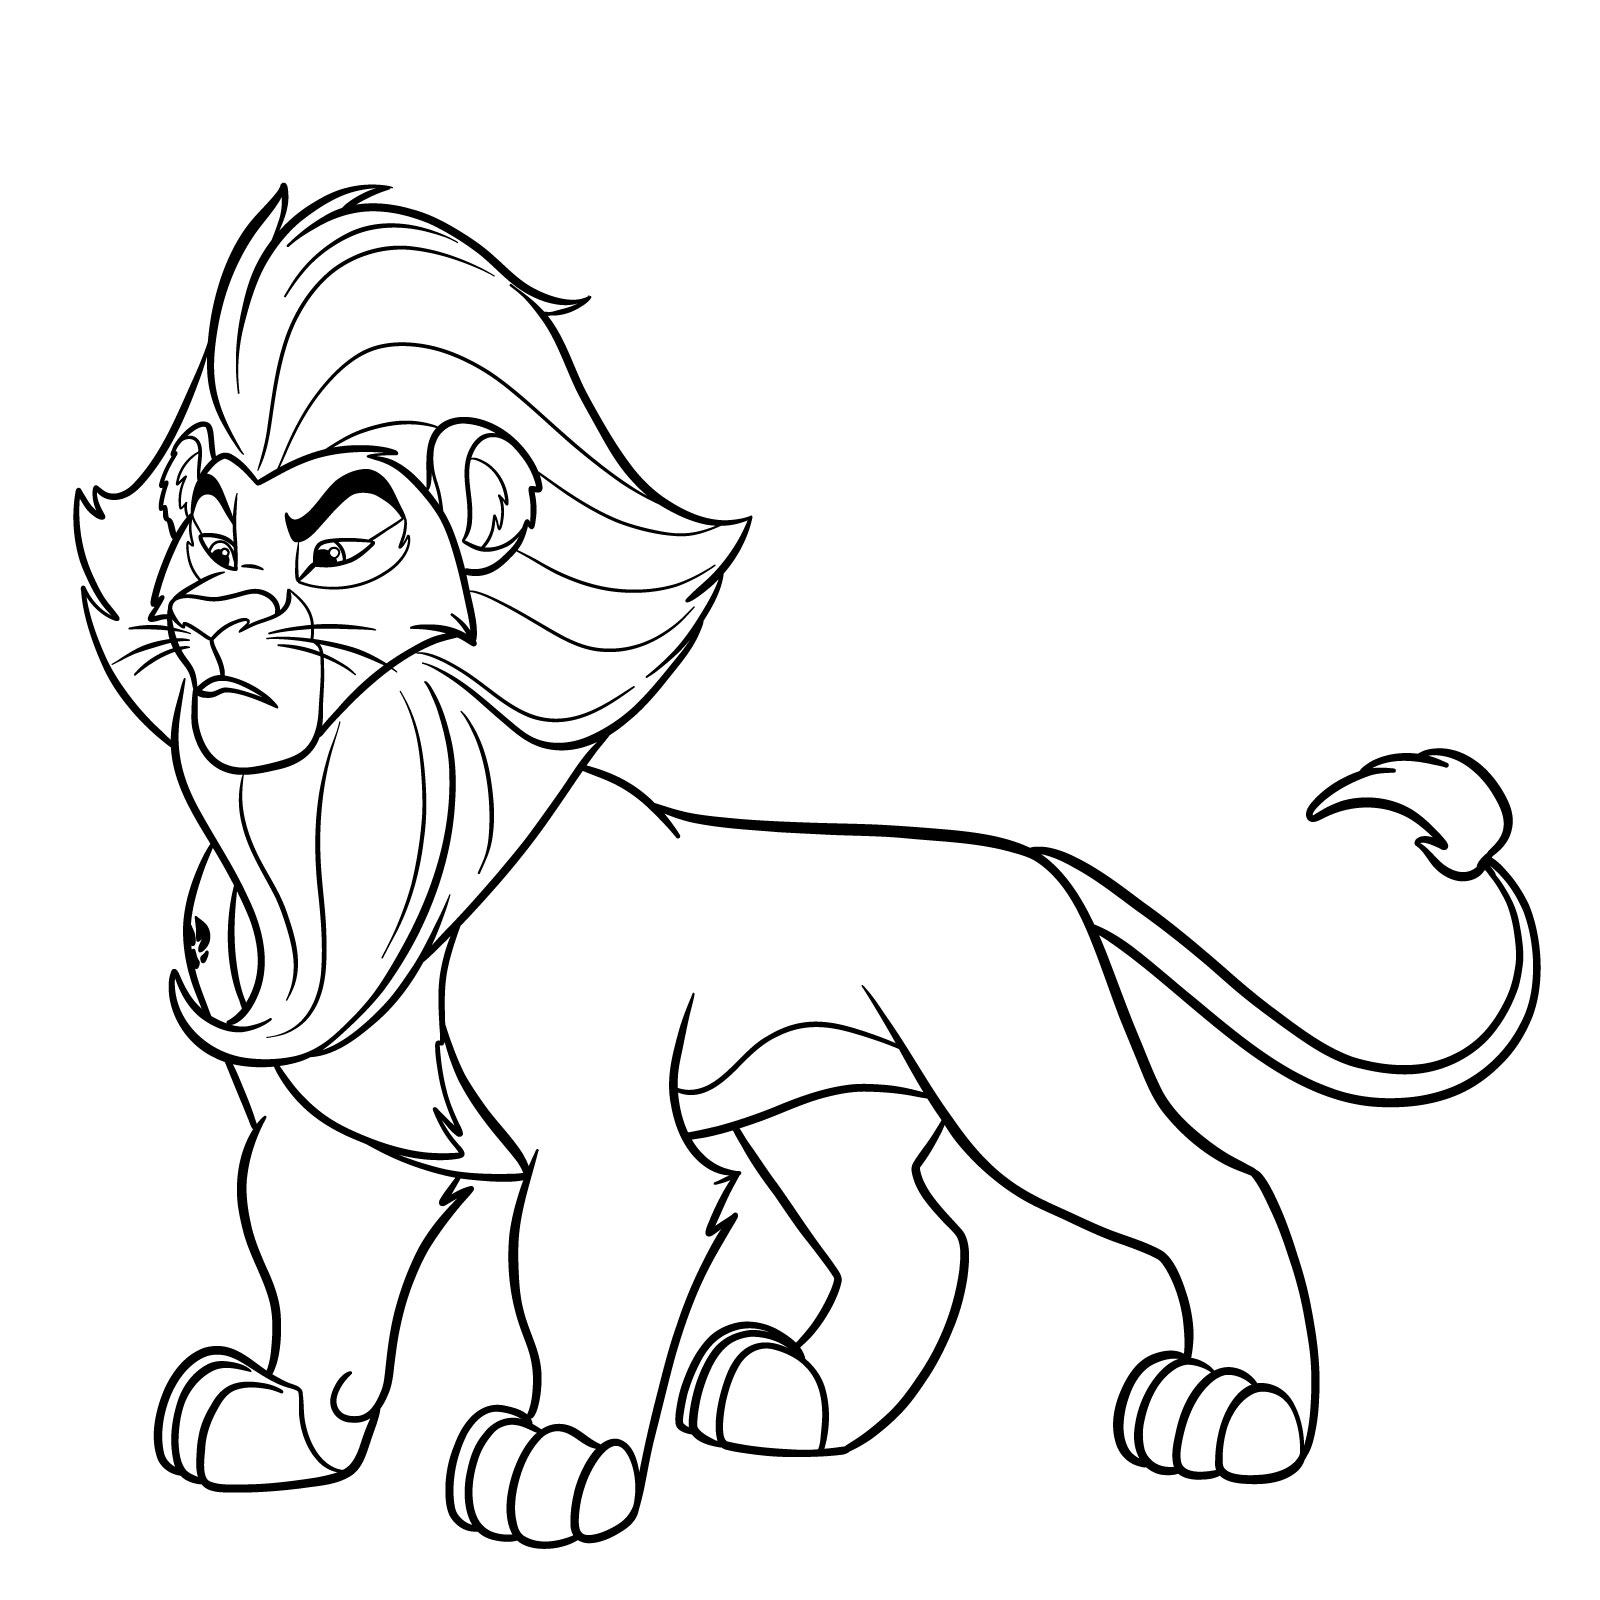 How to draw Surak from The Lion Guard - final step